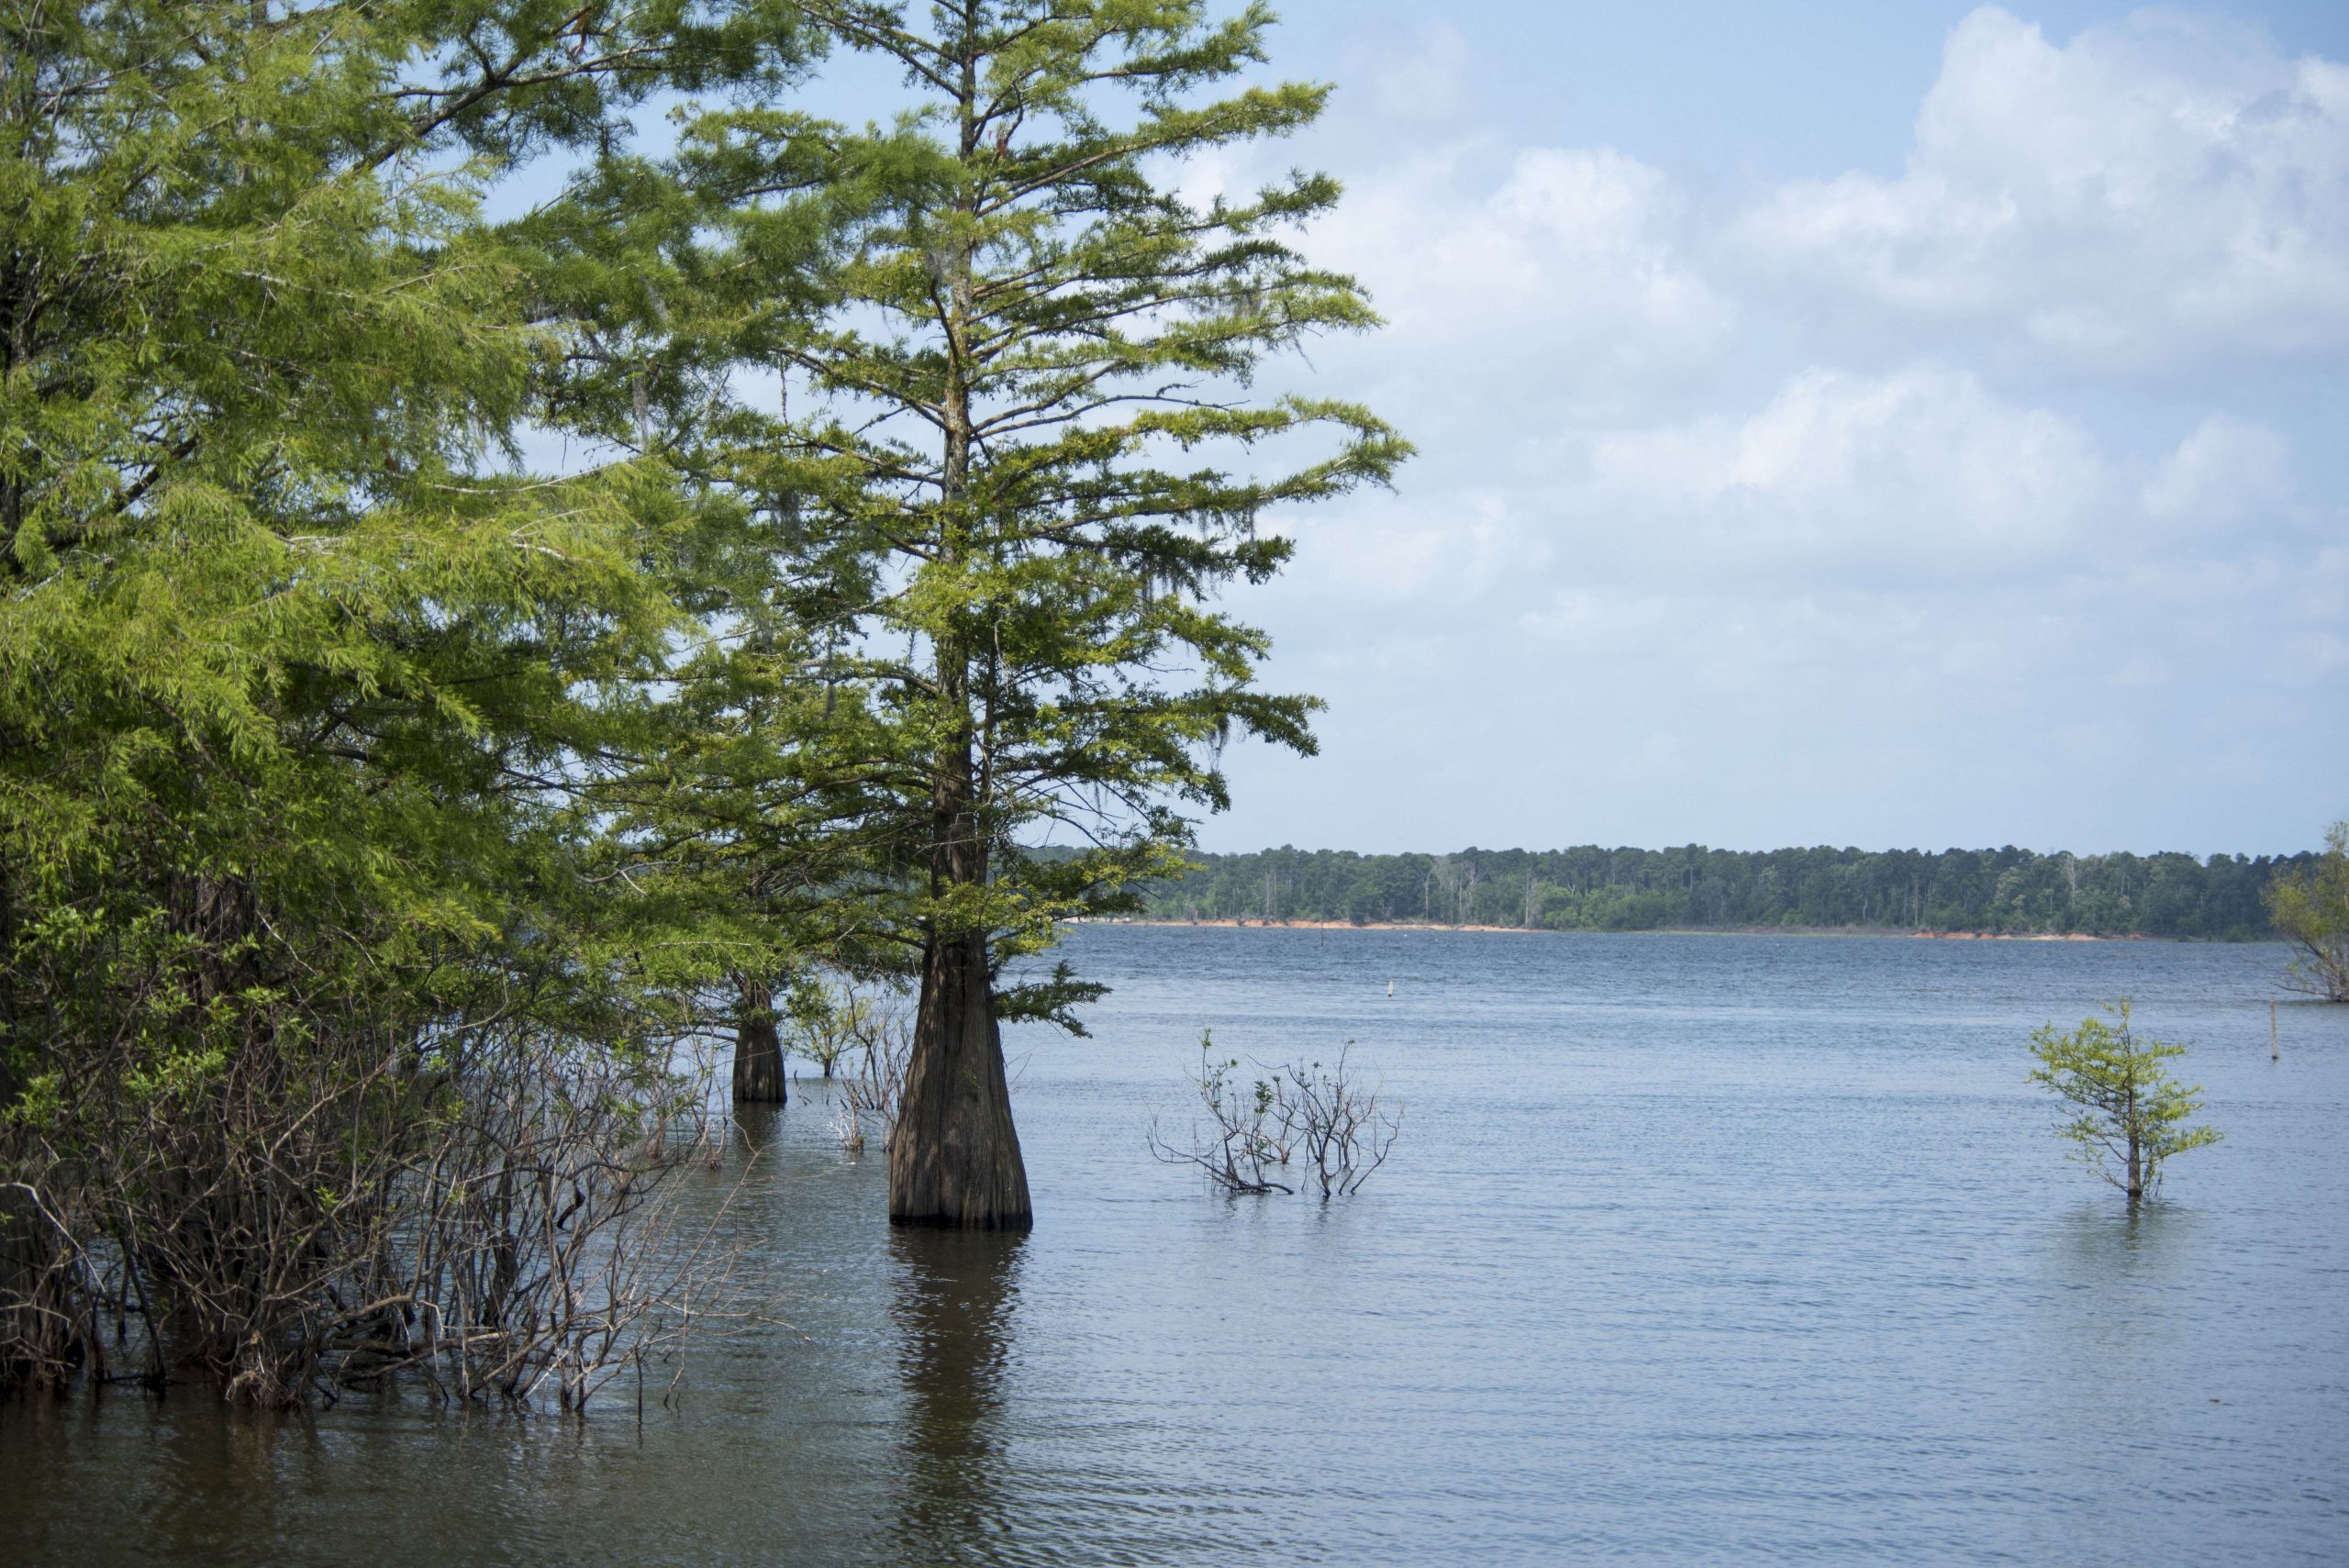 <h4>2. Sam Rayburn Reservoir, Texas</h4>[114,000 acres]<BR> This east Texas powerhouse was No. 1 on the Top 100 Lakes list in 2018, No. 3 in 2019 and itâs shown few signs of weakening. Rayburn produced 16 ShareLunkers in the first four months of 2021, with a pair of 13-pounders kicking the big-bass parade off in January. It took 70-11 to win a three-day pro tournament earlier this year, and winners of most one-day events held recently on the reservoir have demanded limits of 24, 28 and even 30 pounds to win. In April, an 11.29 largemouth won the Sealy Outdoorsâ Big Bass Splash.